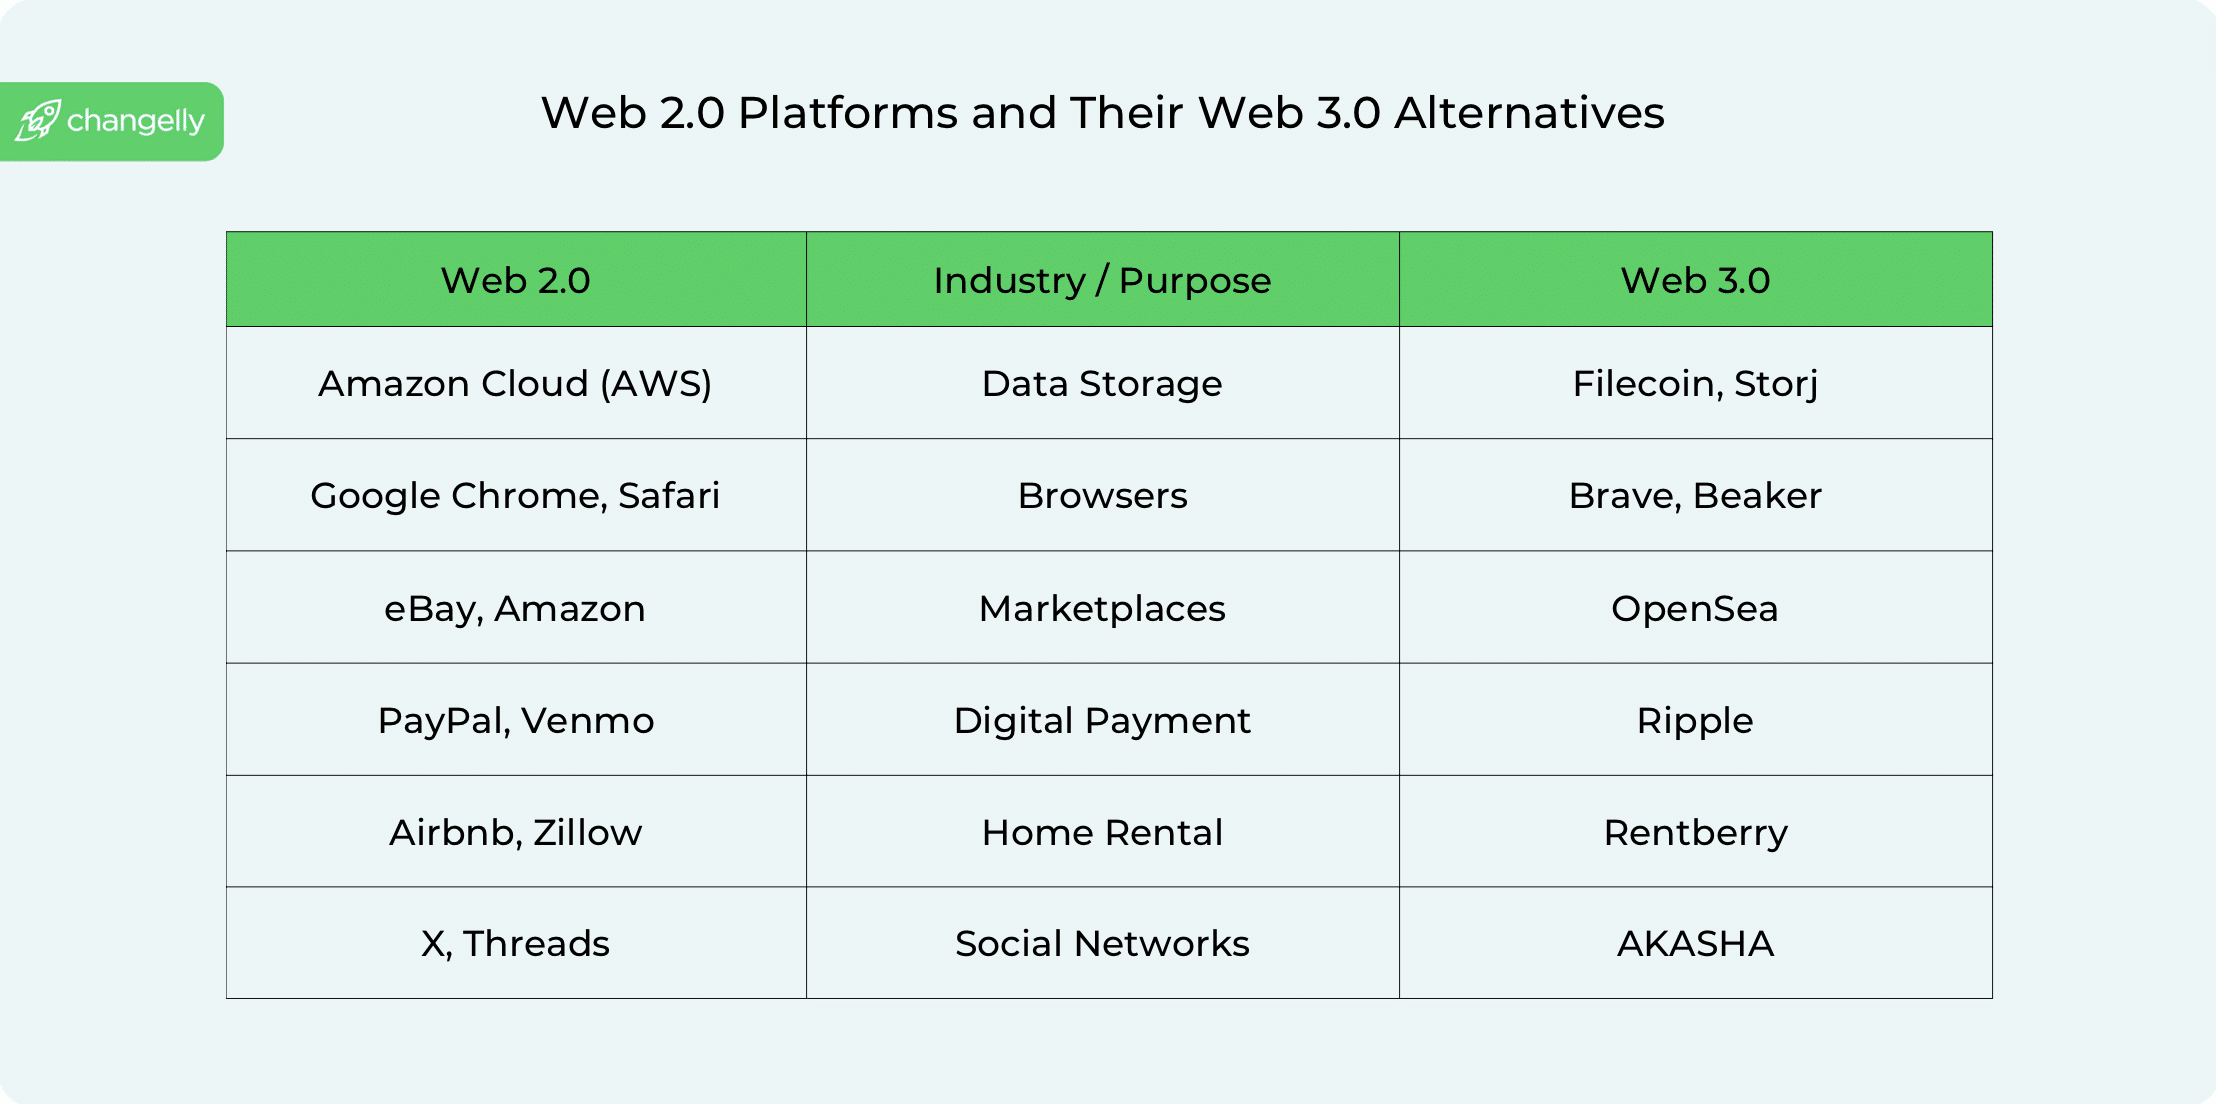 A comparison table between different applications with the same purposes in Web 2.0 vs. Web 3.0.